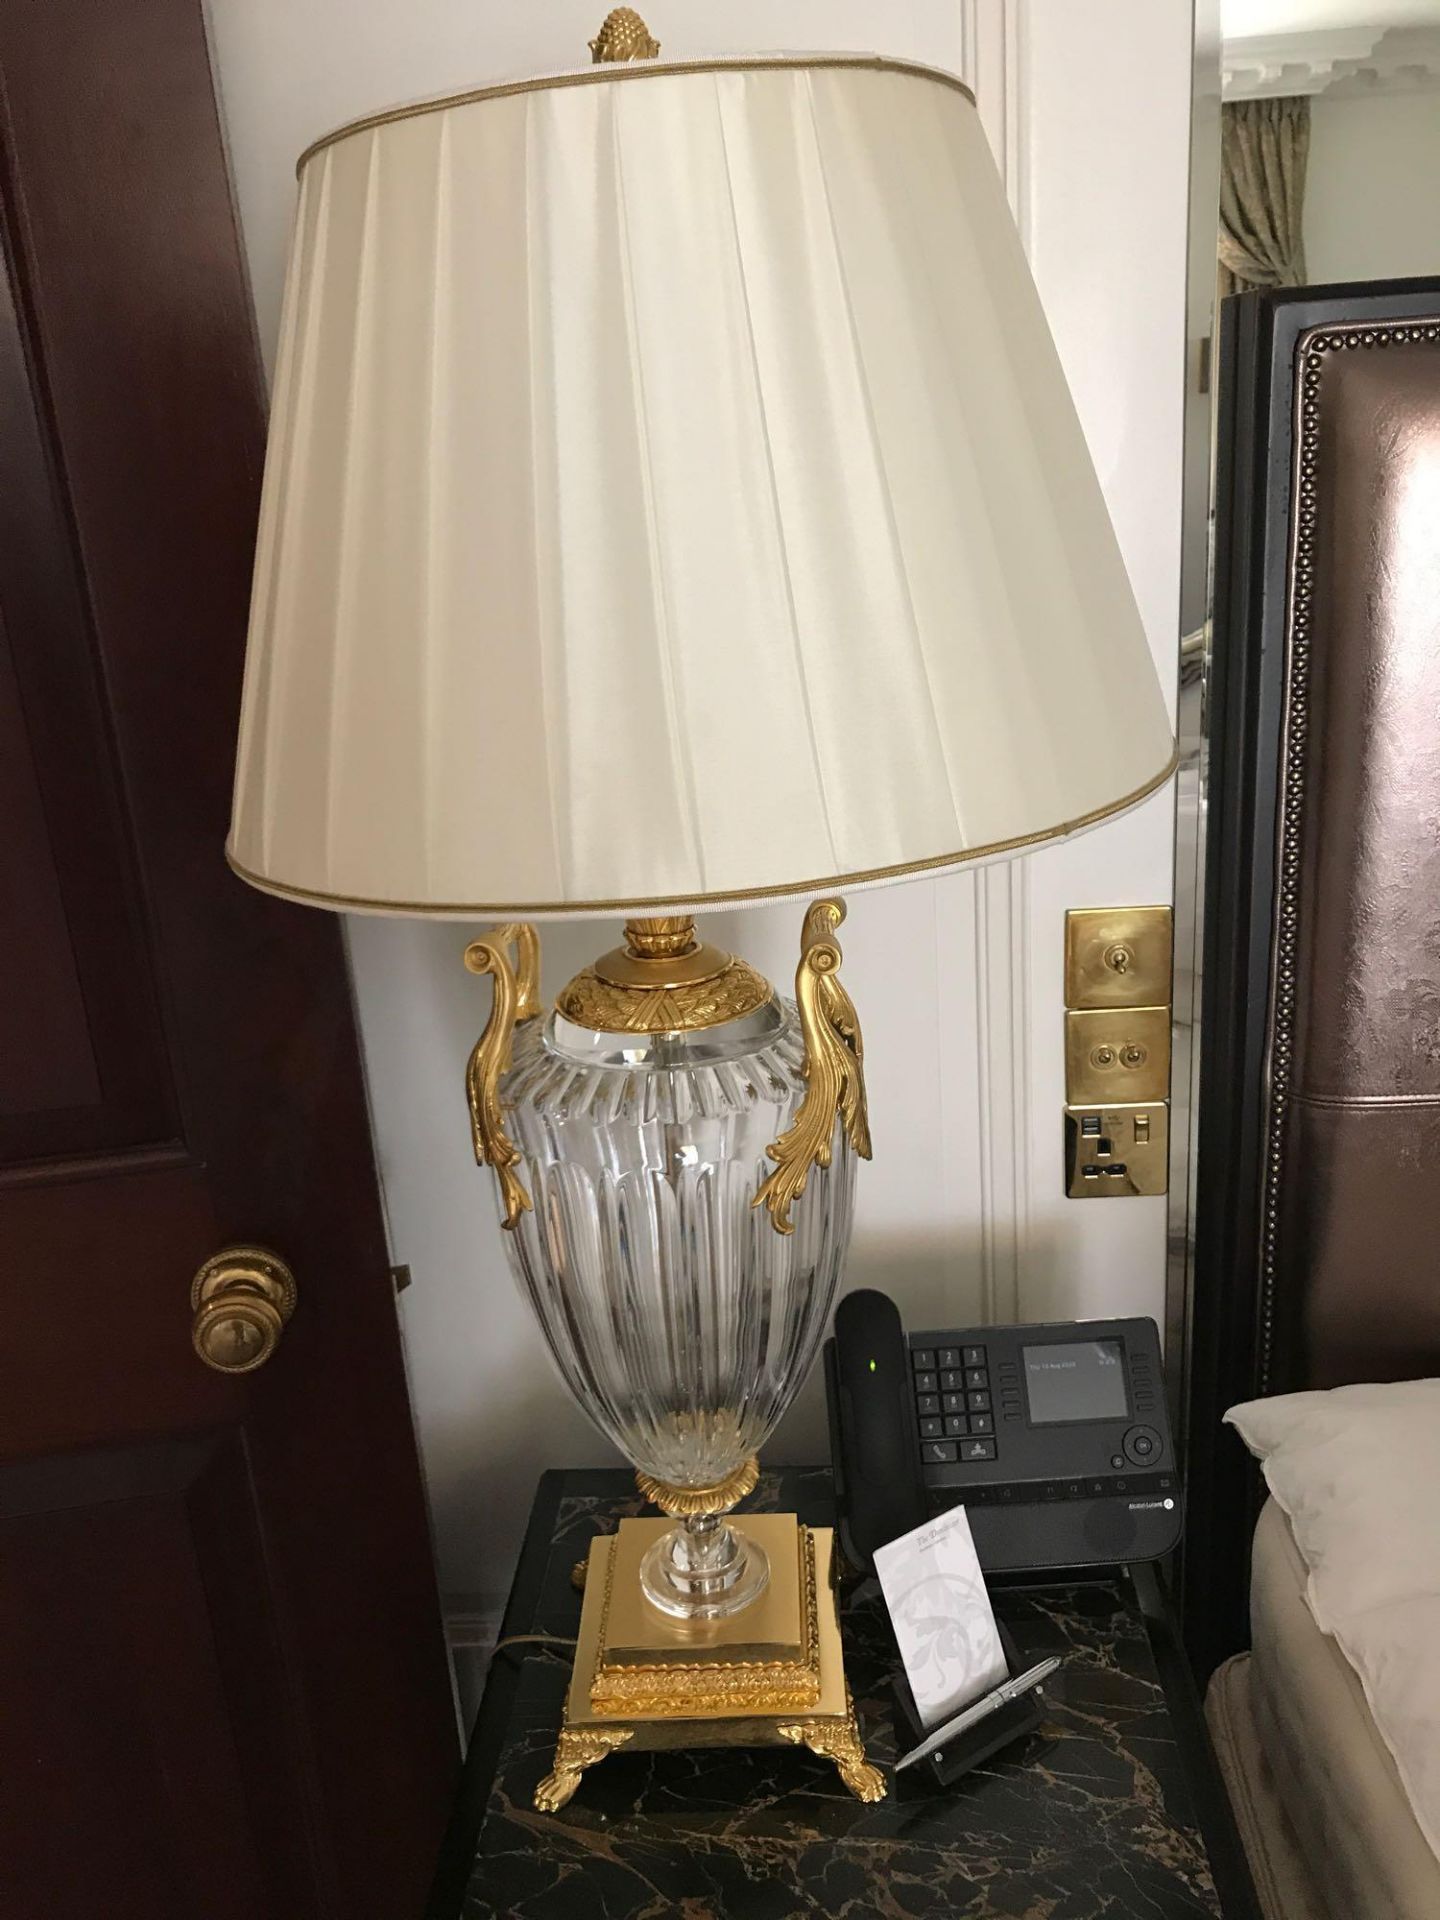 A Pair Of Laudarte Crystal Table Lamps Inserts And Decorations In 24ct Gold With Shade 95cm Tall